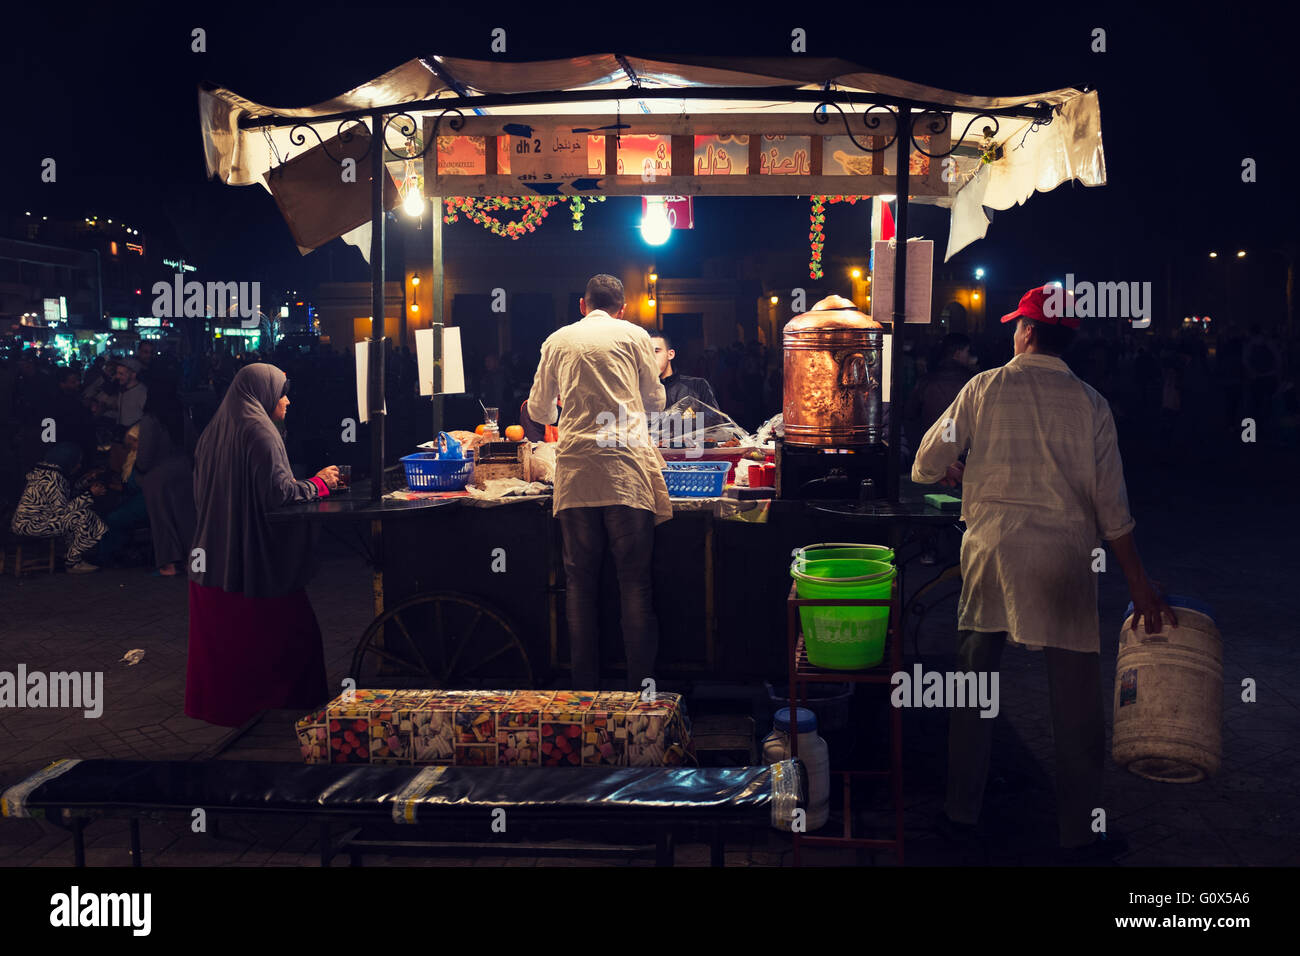 Food stall in Marrakesh square at night Stock Photo